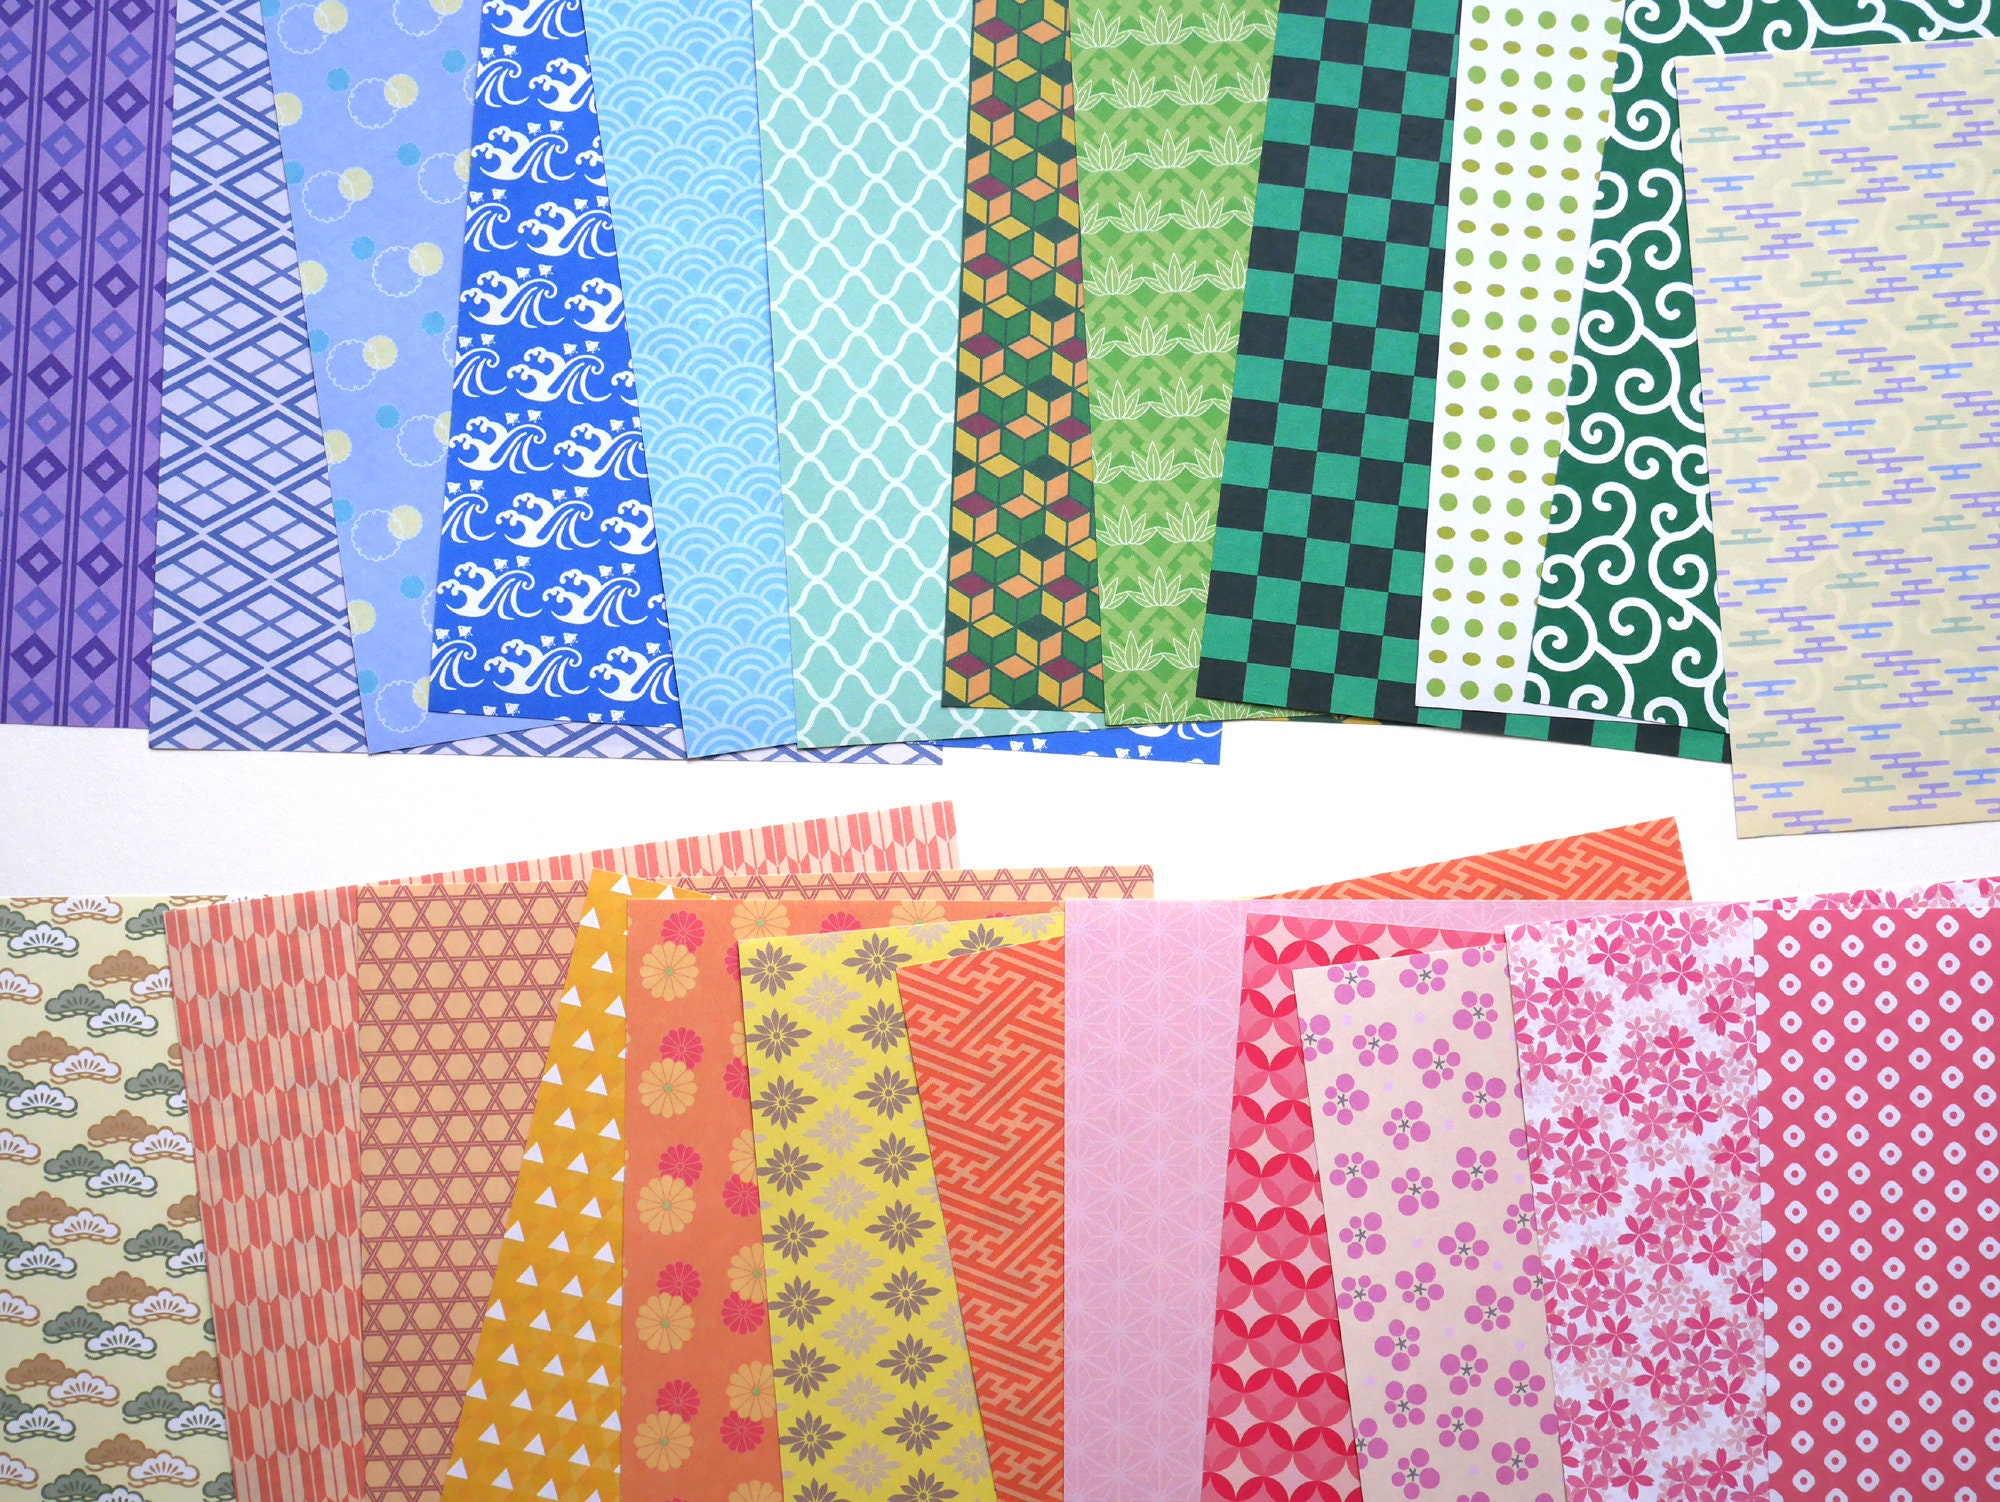 Lot Block 100 Sheets of Japanese Paper From Kyoto for Origami Folding 